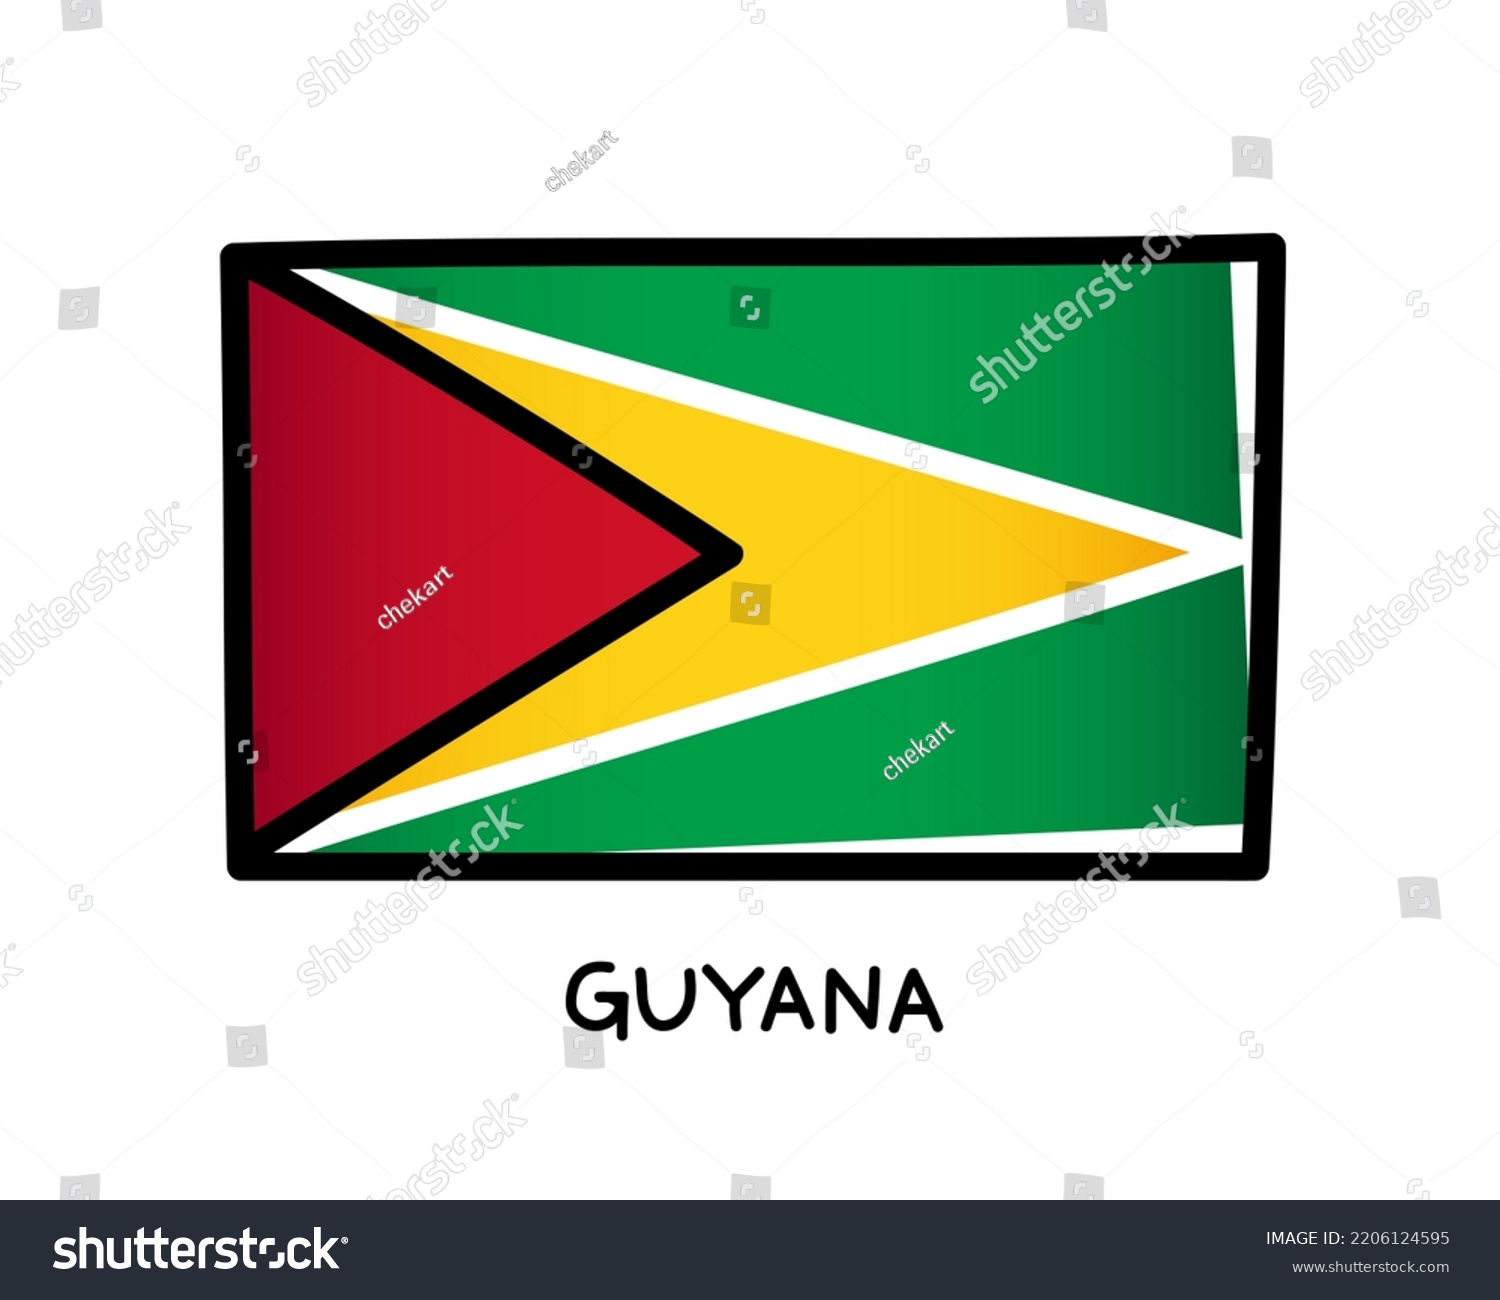 SVG of Flag of Guyana. Colorful Guyanese flag logo. Green, white, black, red and yellow hand-drawn brush strokes. Black outline. Vector illustration isolated on white background. svg